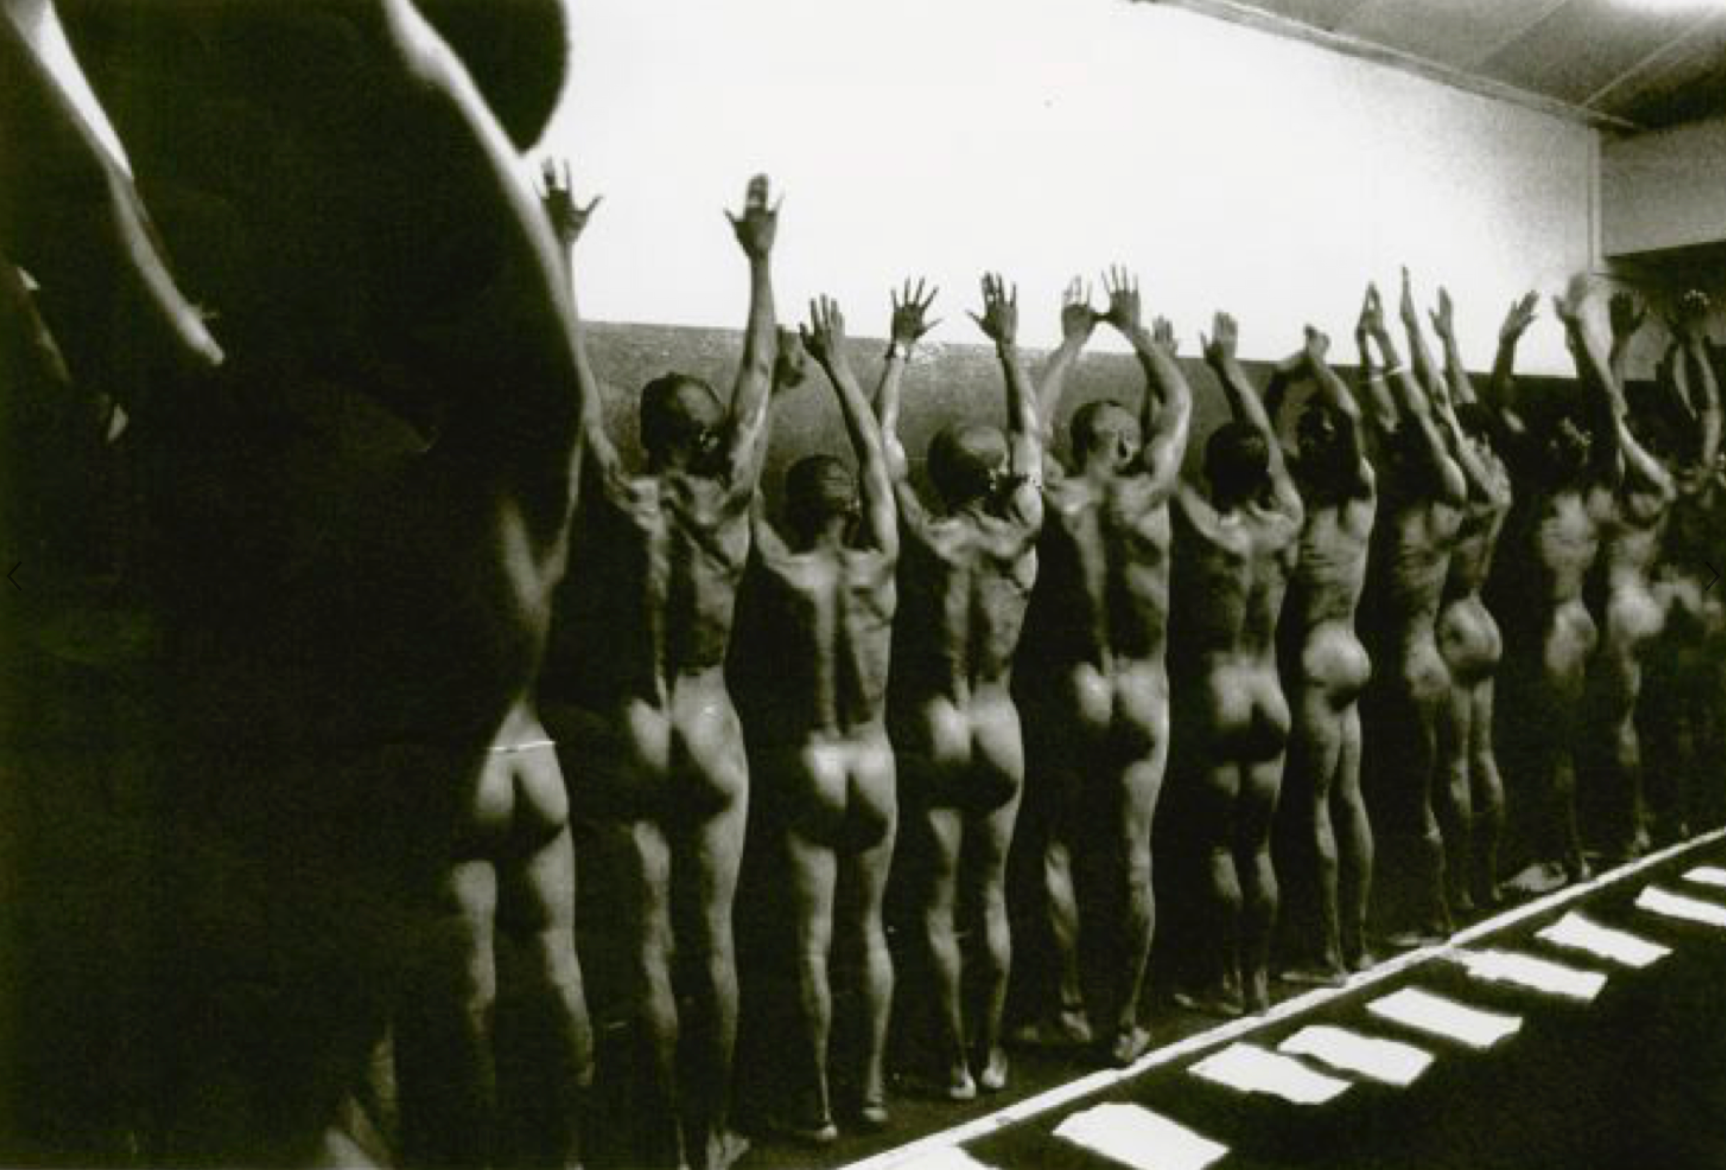 Peter Magubane's monochrome photograph 'Mine recruits humiliated by being forced to strip naked for tuberculosis examination, Witwatersrand'.
